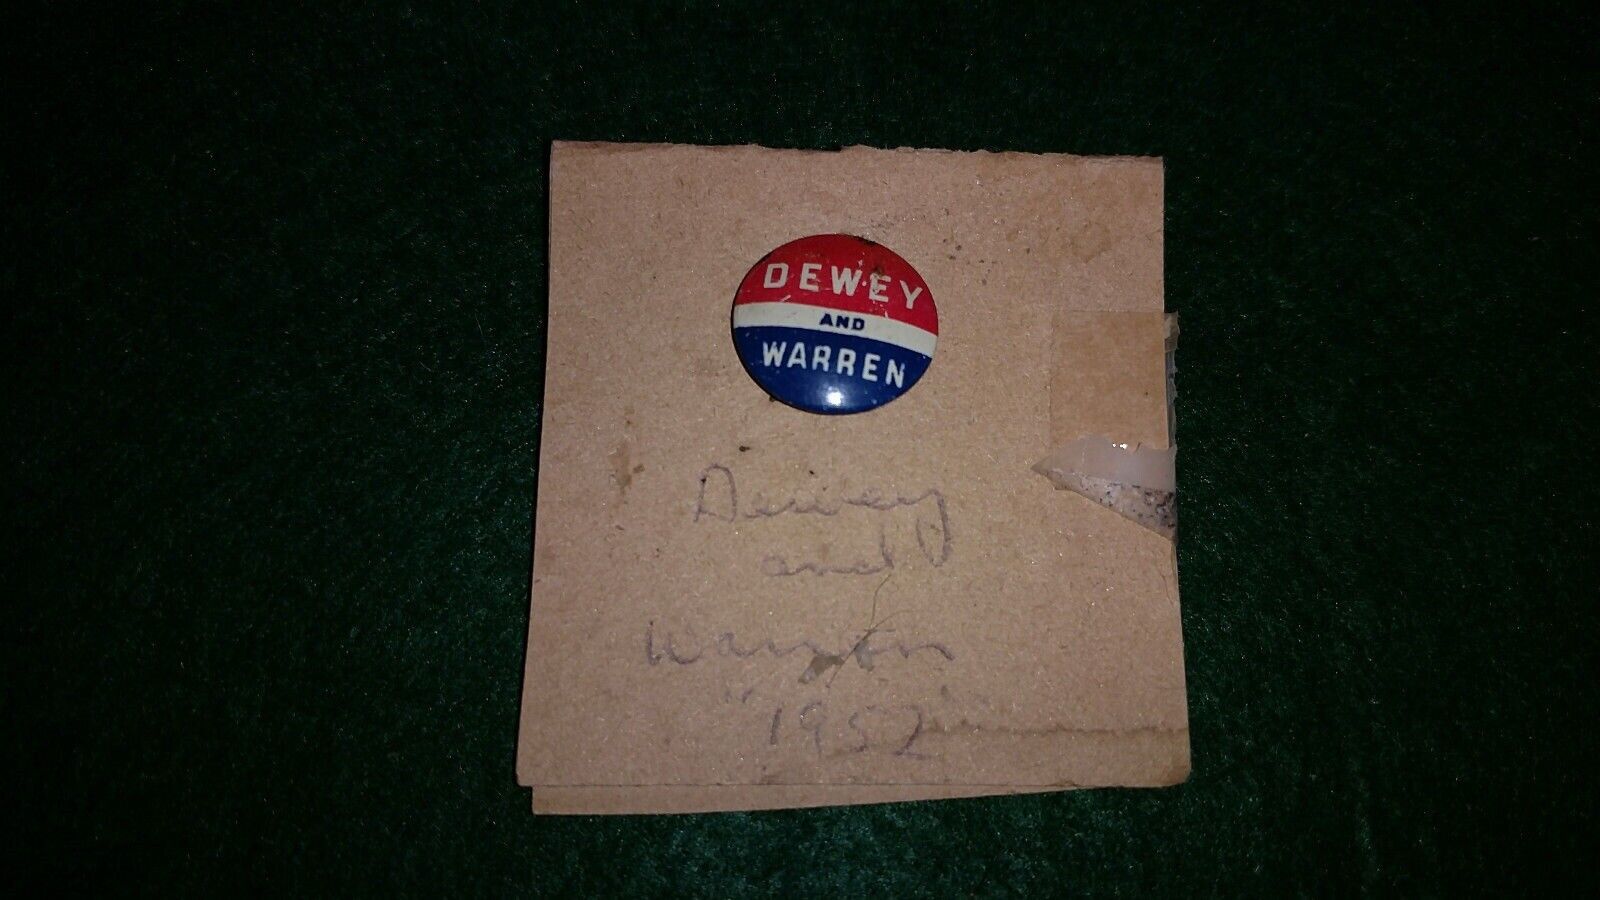 Campaign Button from 1948 Dewey and Warren Election